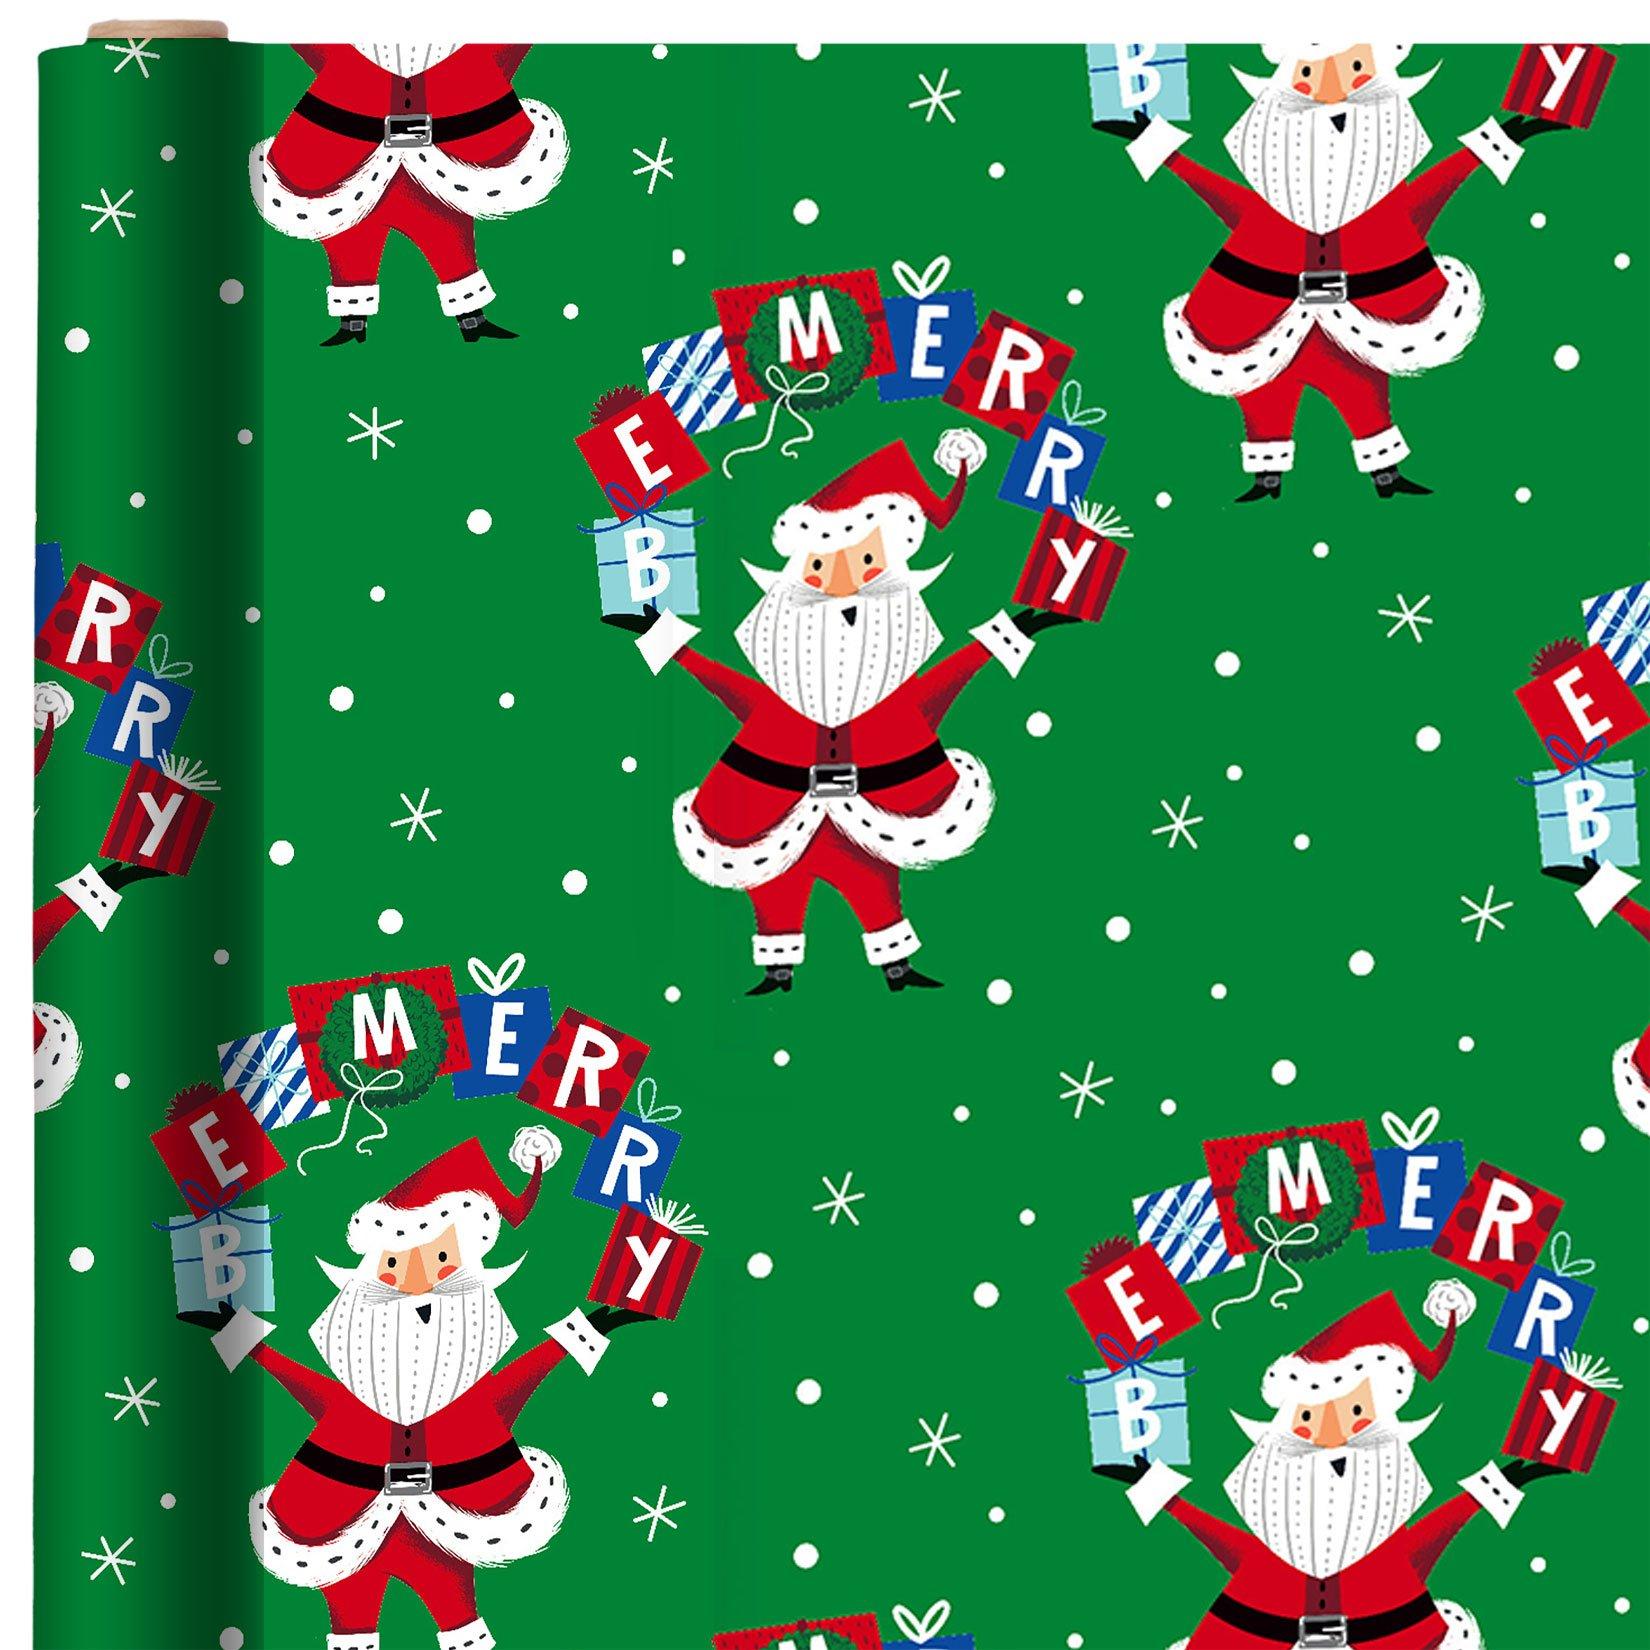 Star Wars Christmas Wrapping Paper 50 Sq.Ft